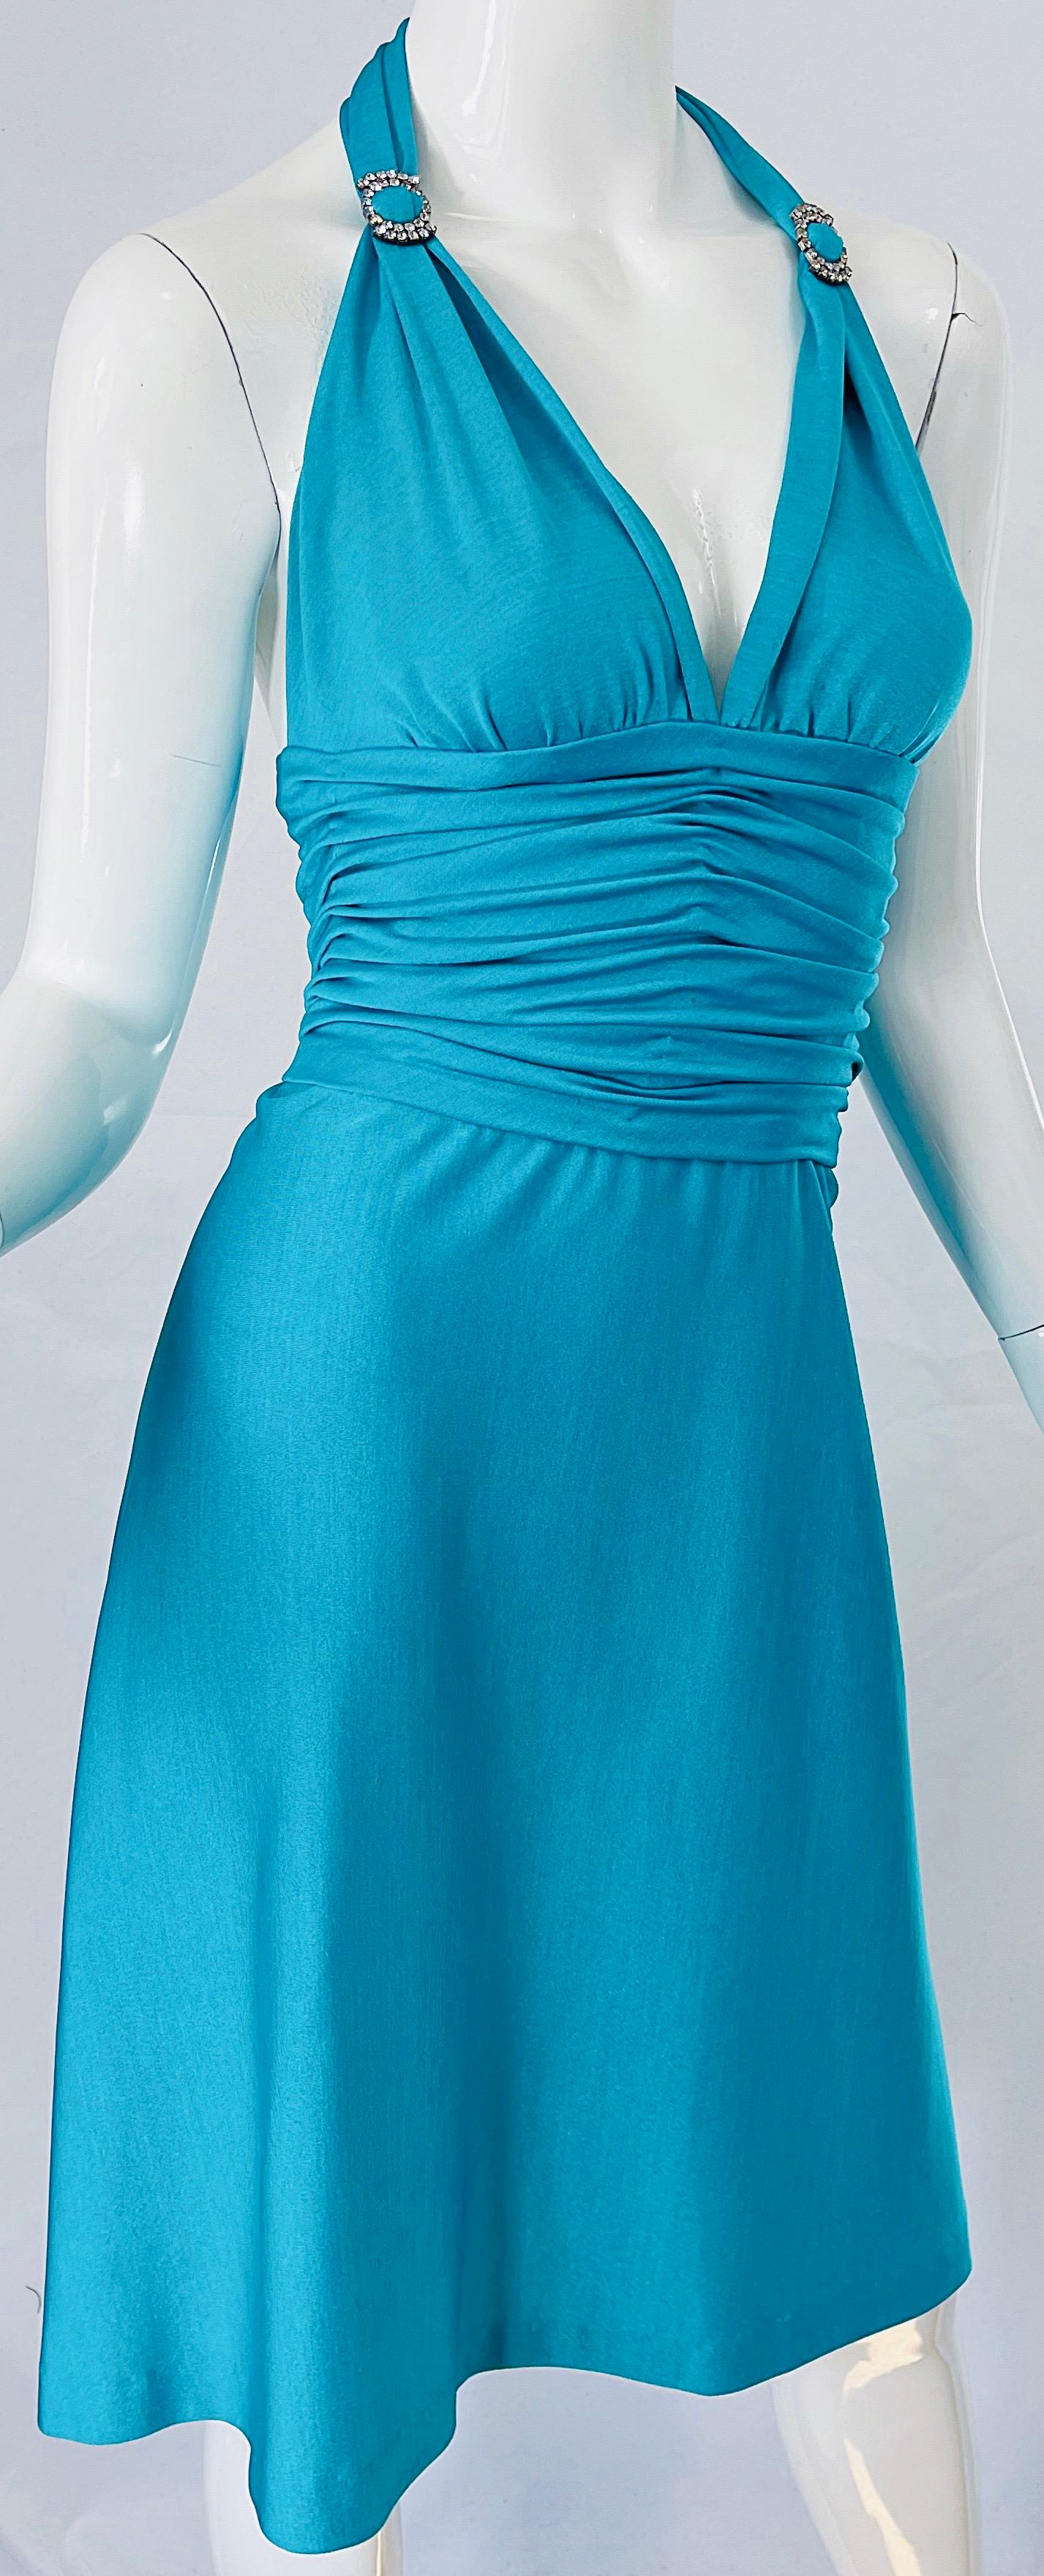 1970s Loris Azzaro Couture Turquoise Blue Silk Jersey Rhinestone Vintage Dress For Sale 5